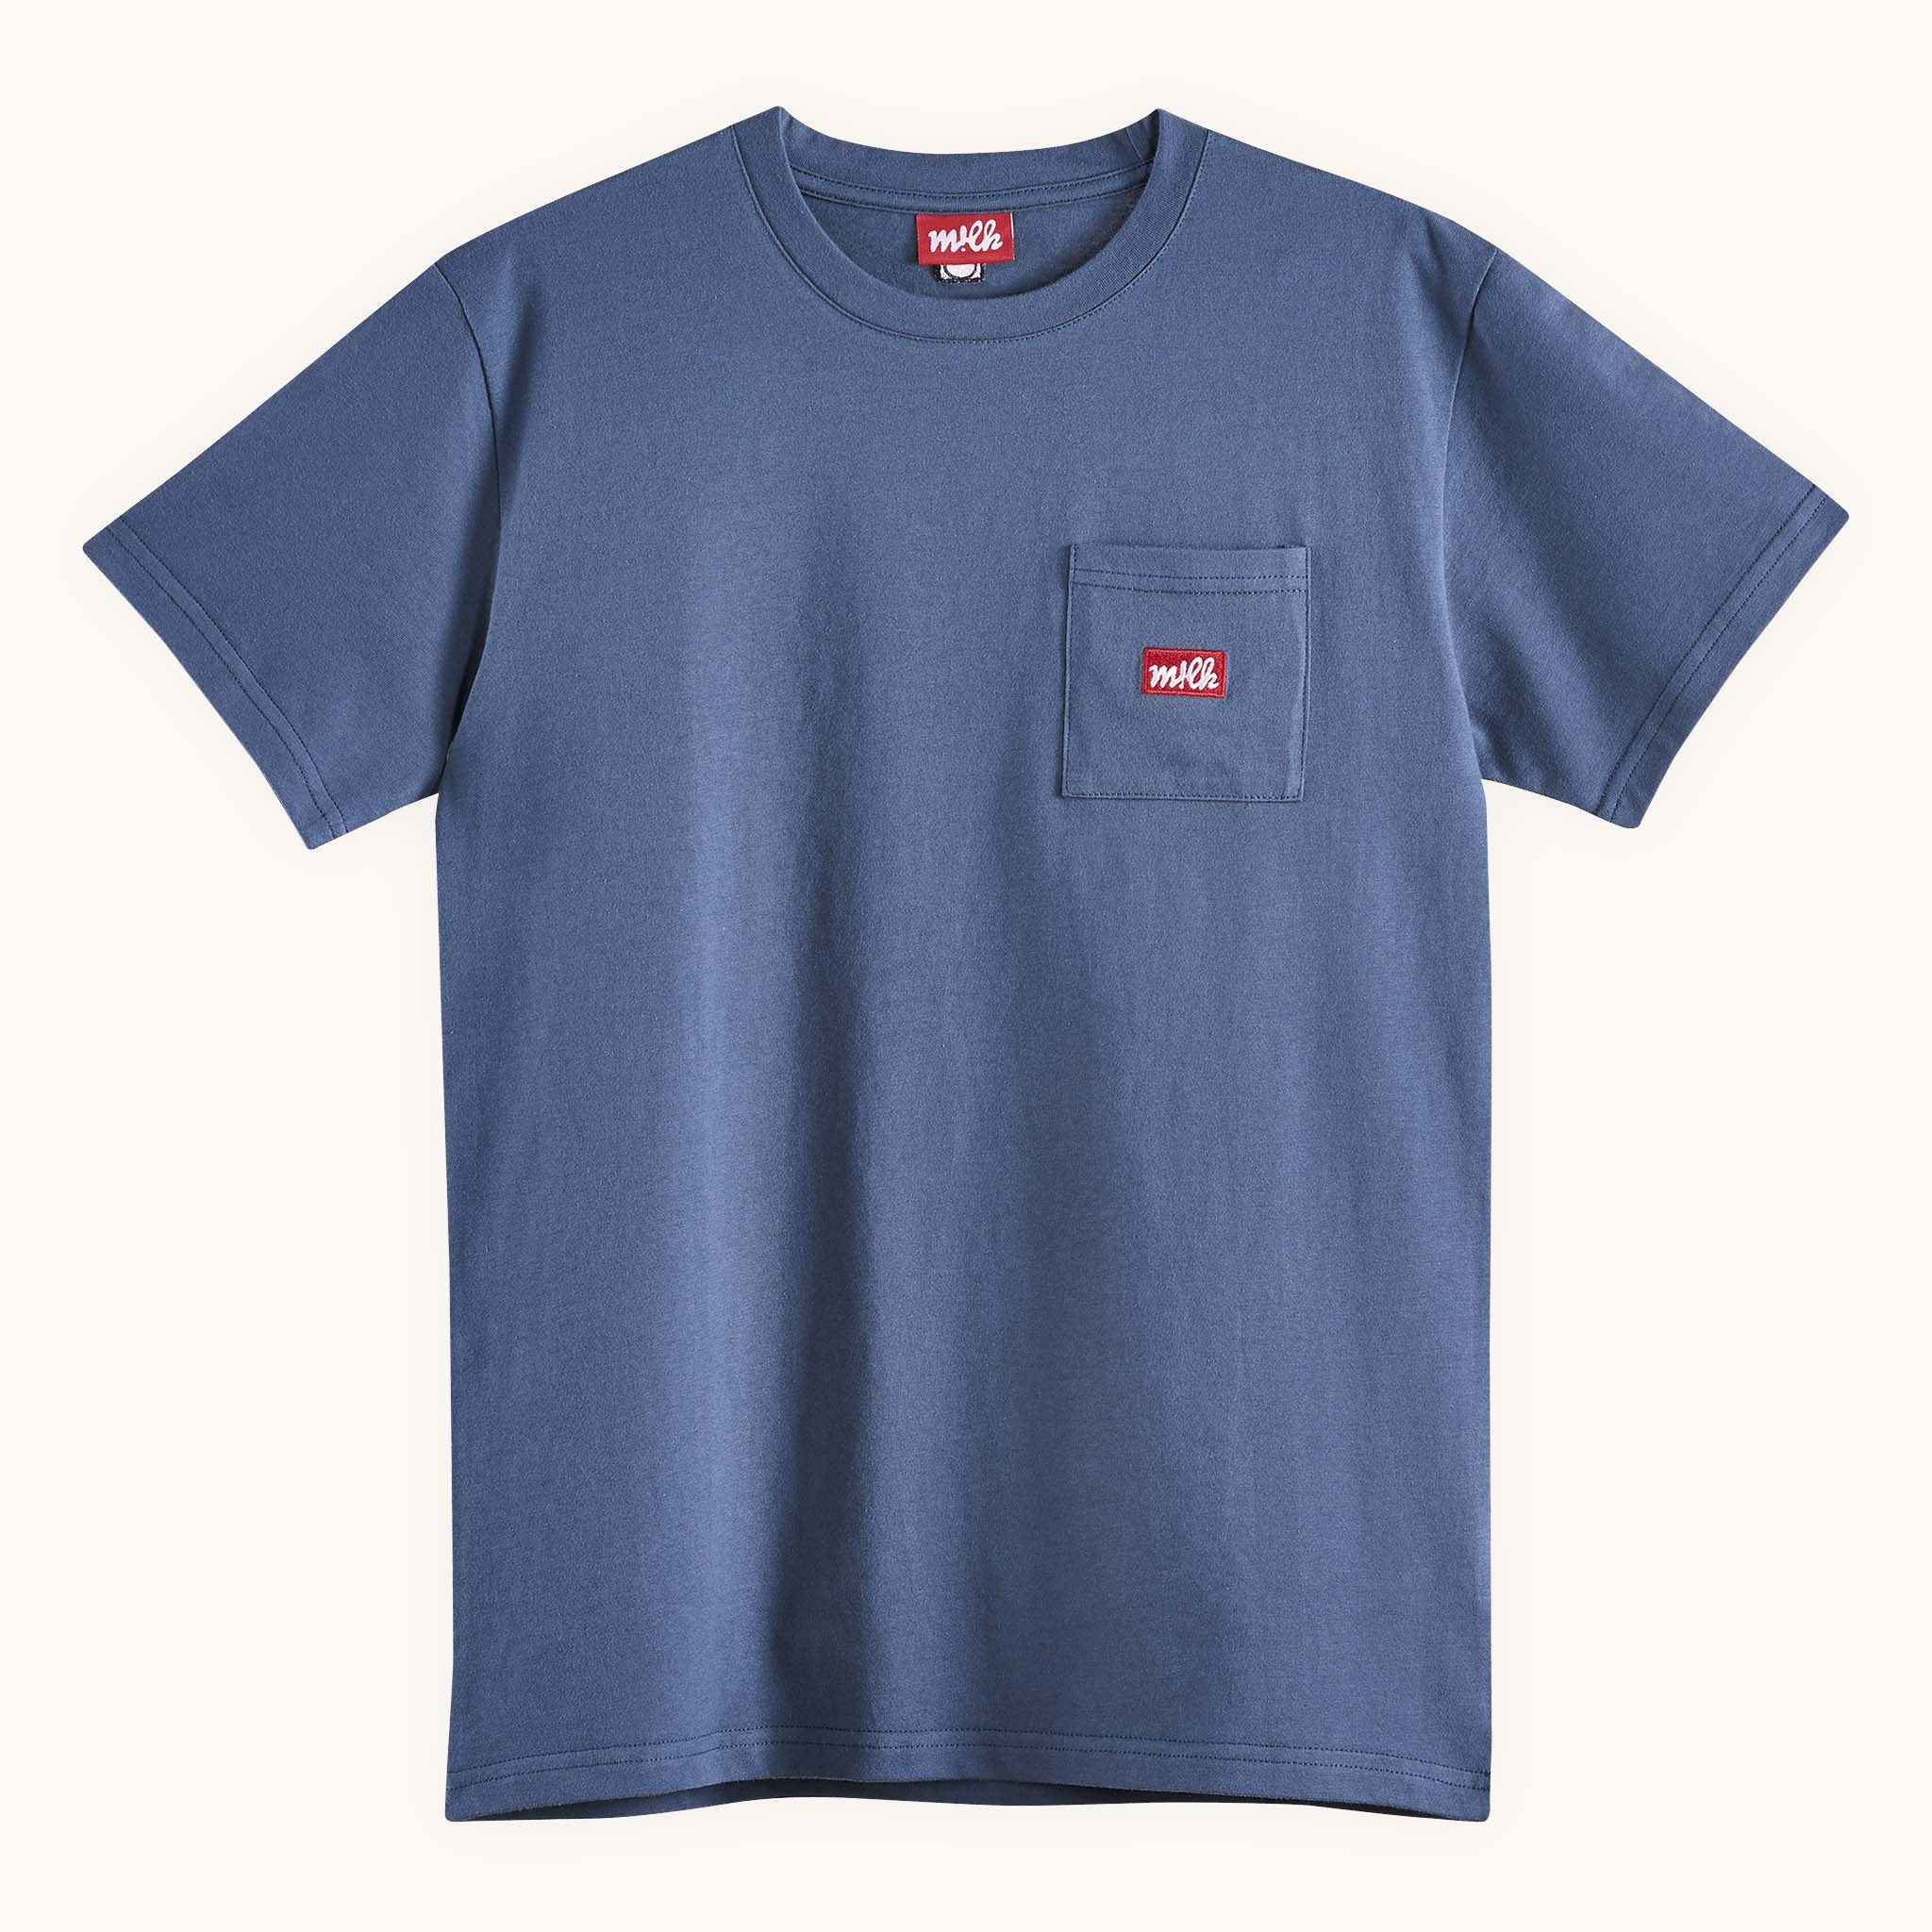 navy pocket t-shirt with embroidered pocket